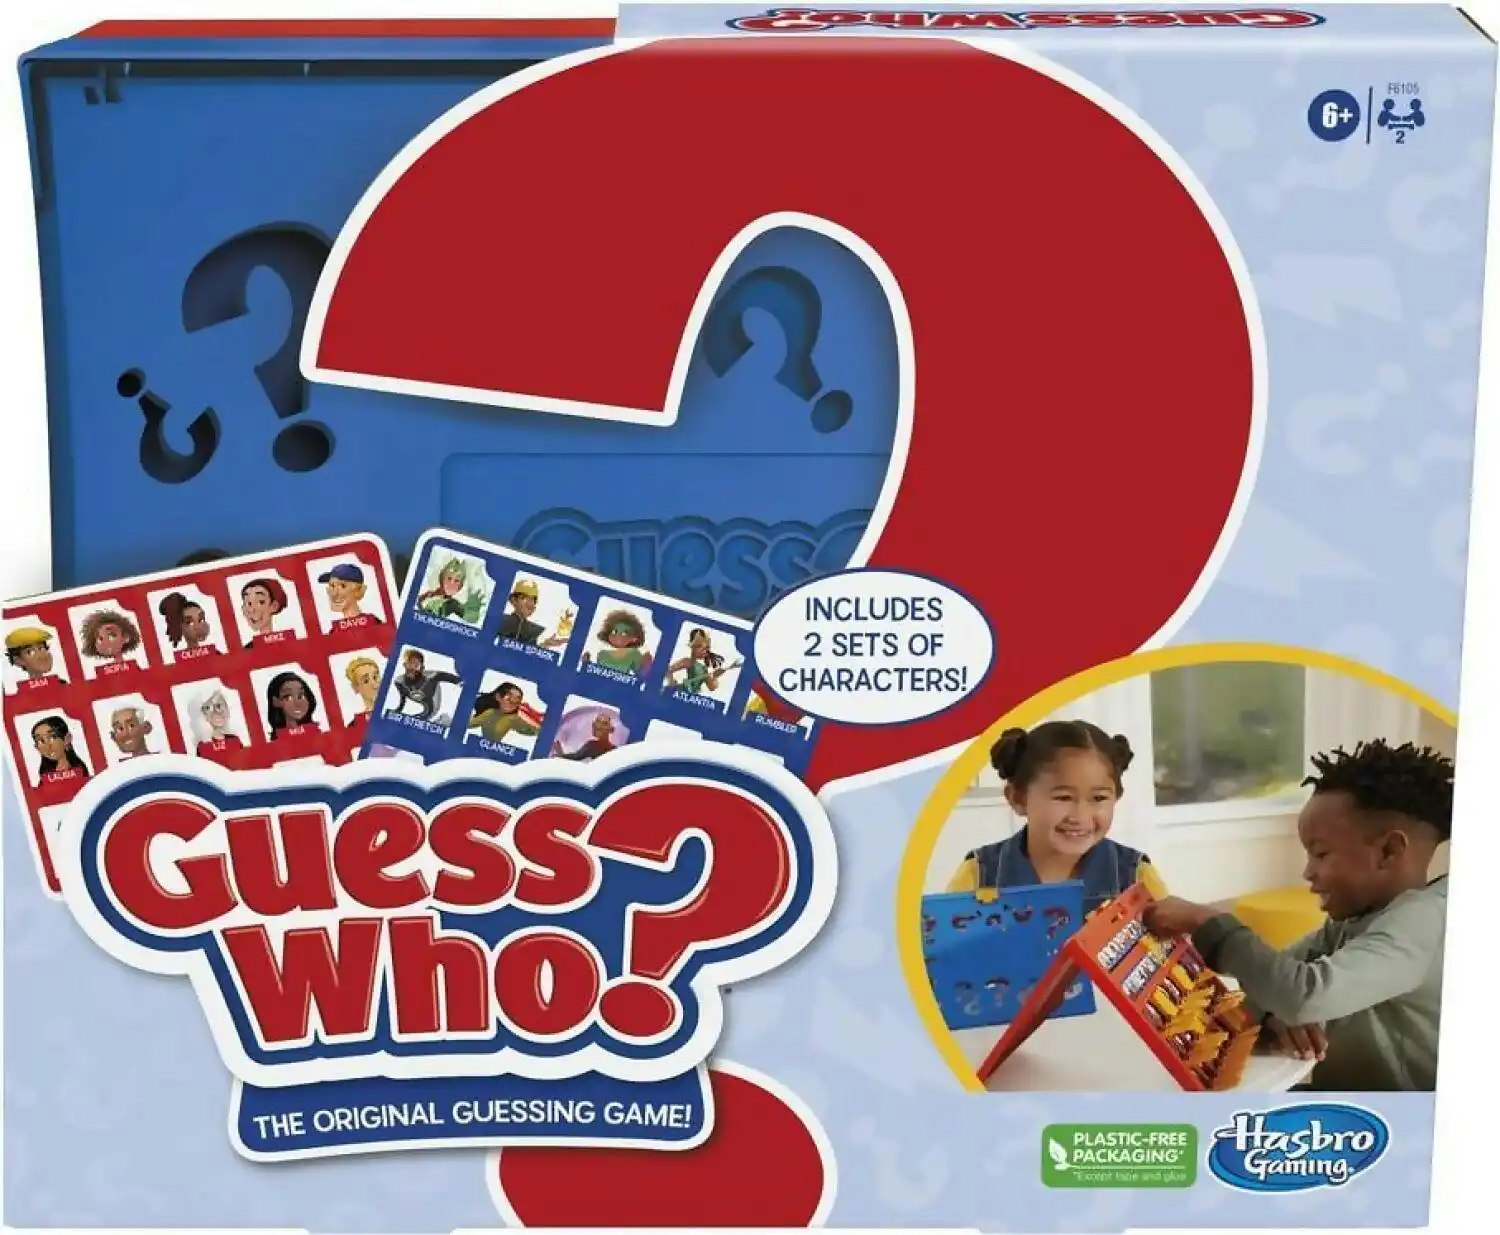 Hasbro - Guess Who? Original Guessing Game Board Game For Kids Ages 6 And Up For 2 Players